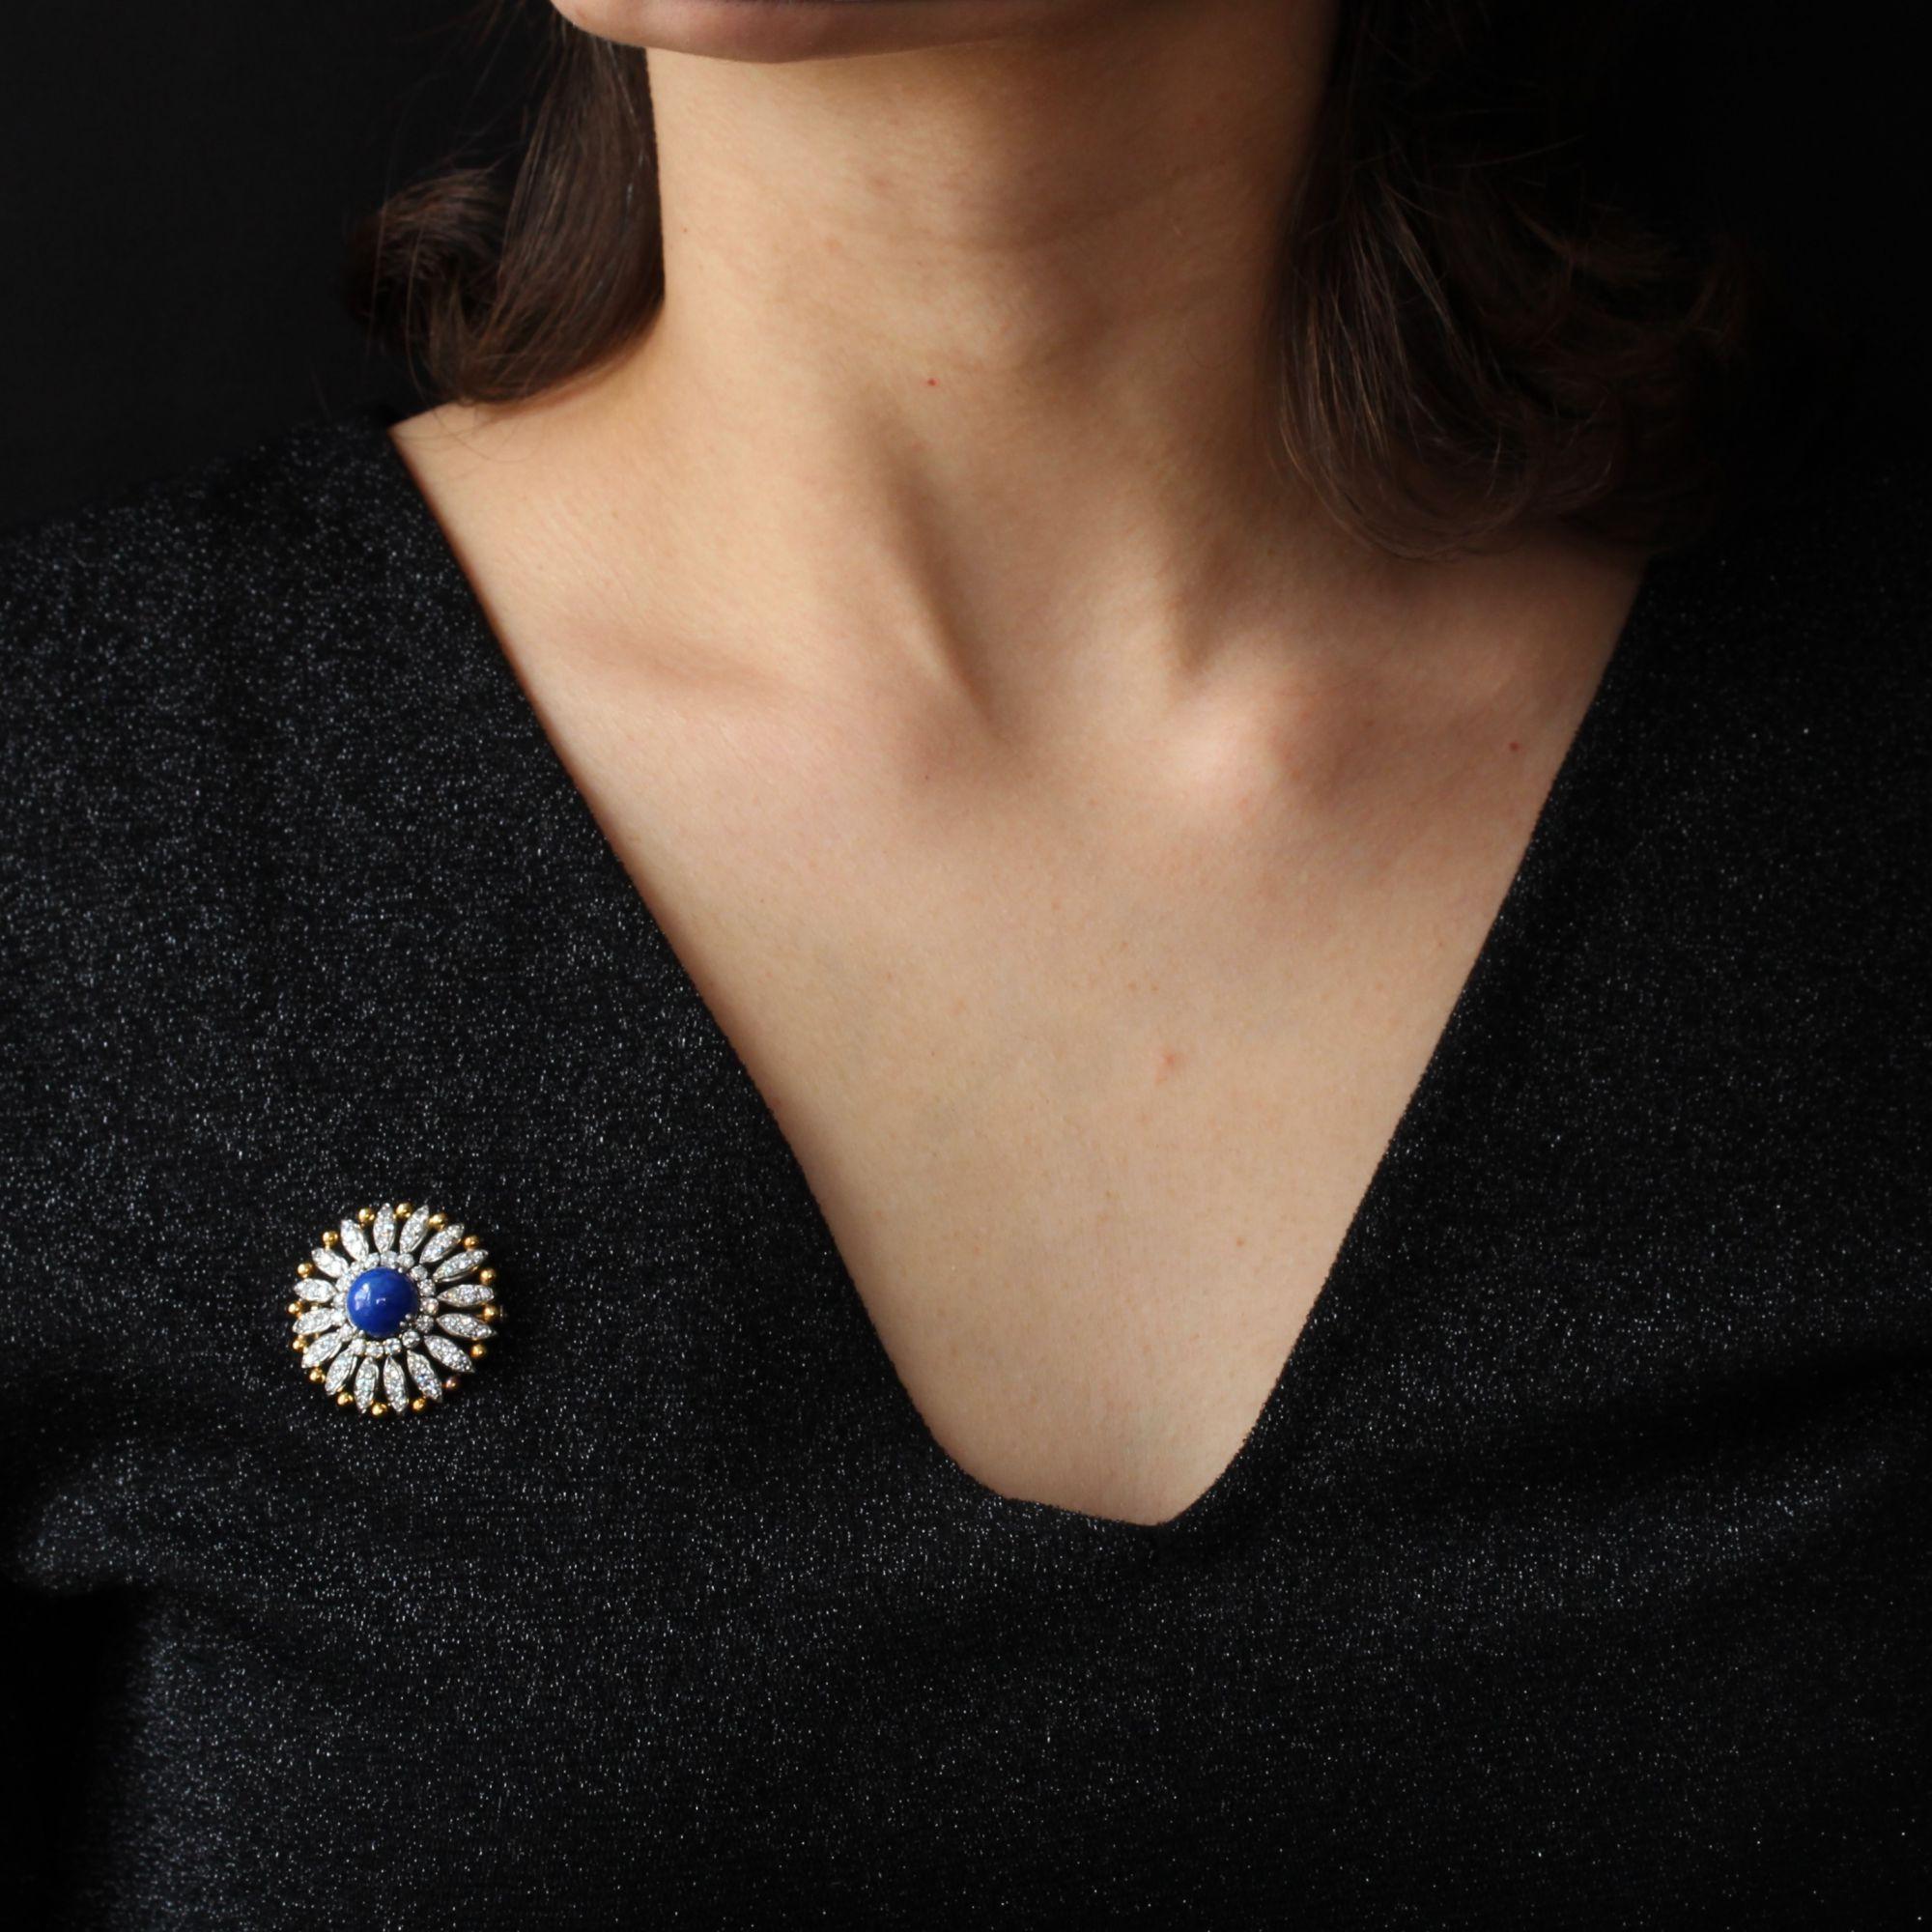  Brooch in 18 karat yellow gold, owl hallmark and platinum, grotesque hallmark.
Round, in the shape of a flower, the heart of this antique brooch is decorated with a lapis lazuli cabochon surrounded by a row of brilliant-cut diamonds. The petals, in